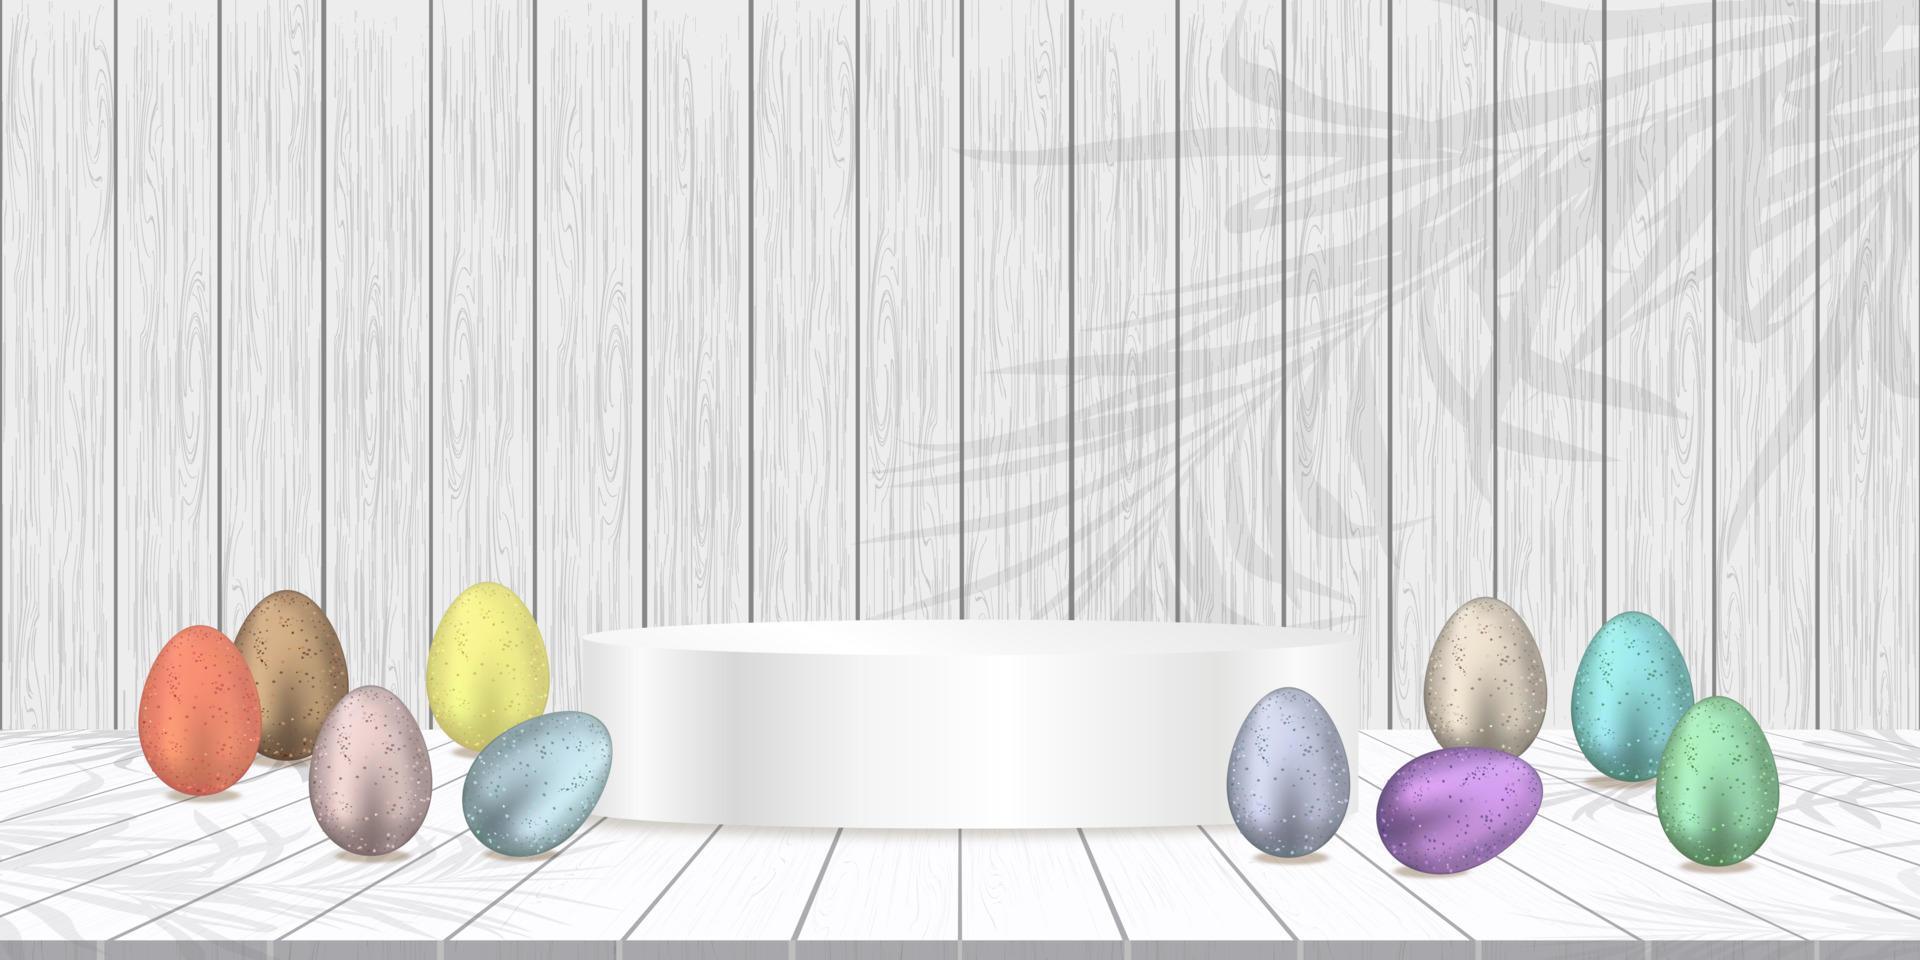 Happy Easter Background Banner Studio Room Table Top,Product Display with Copy Space.Traditional Easter Eggs with 3d Podium on White Wood Texture floor,Concept for Promotion on Easter Day vector